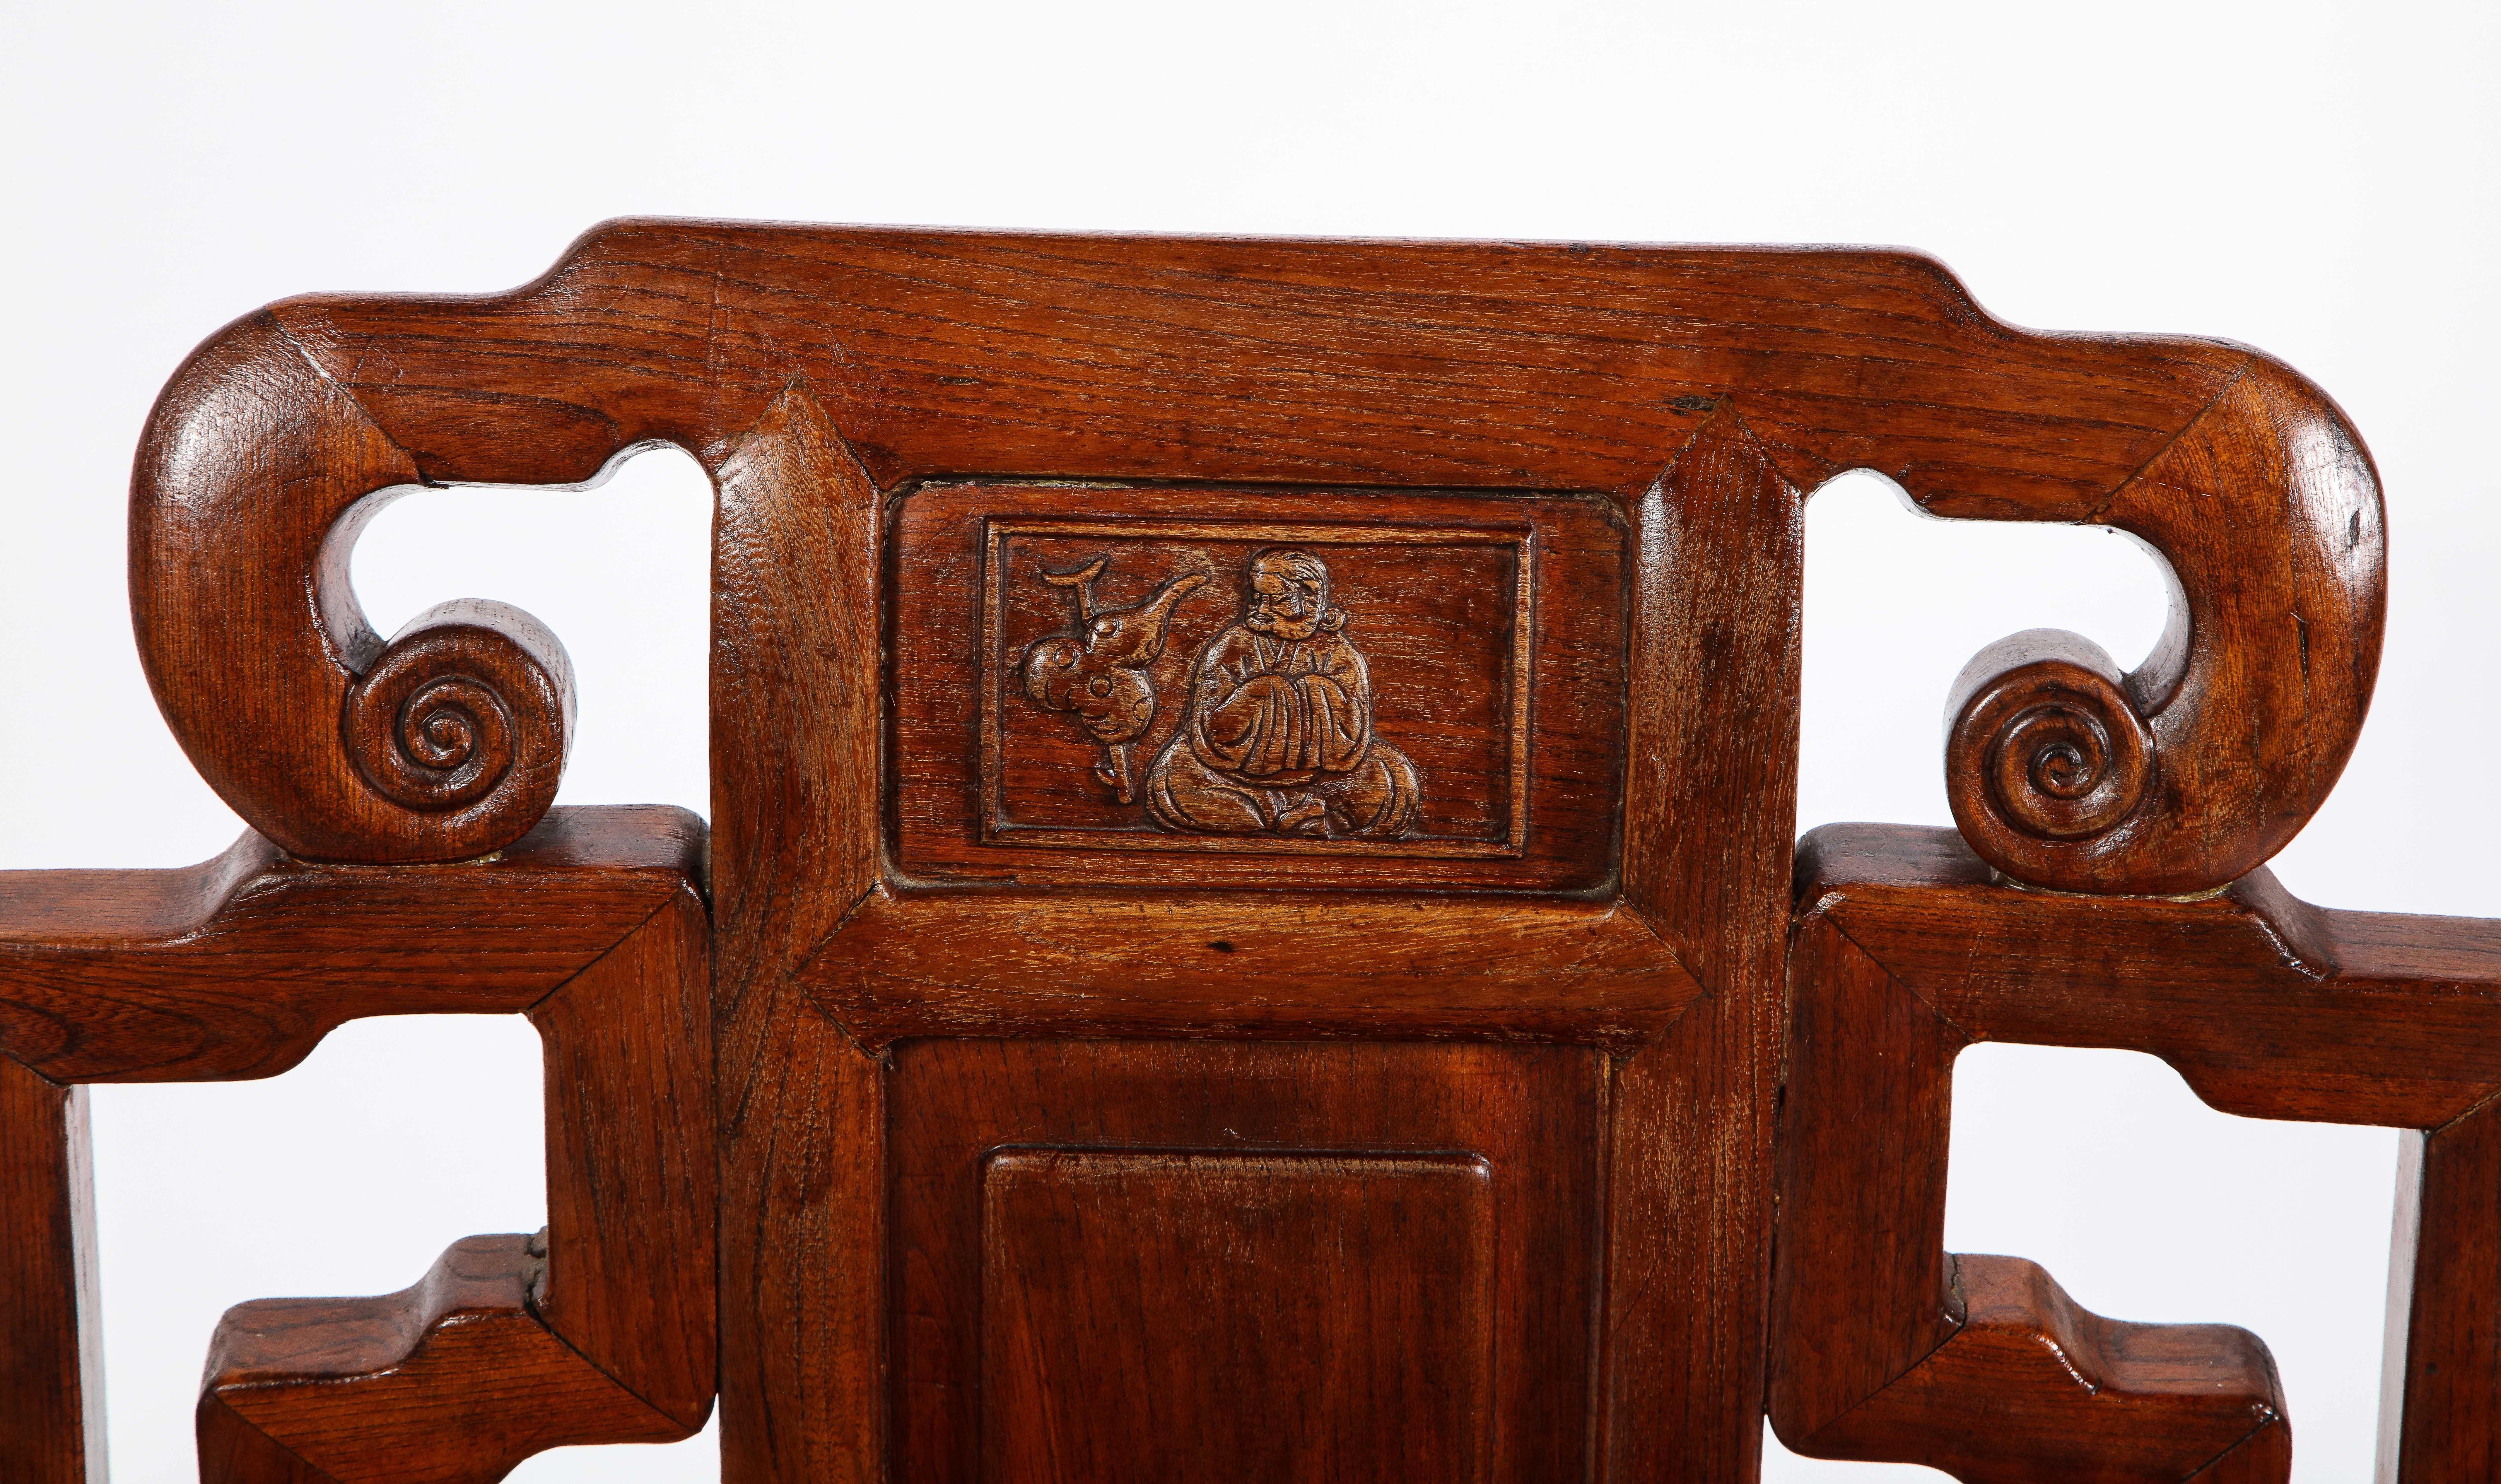 Late 19th Century Pair of Chinese Hardwood Chairs with Fretwork Designs and High Relief Panels For Sale